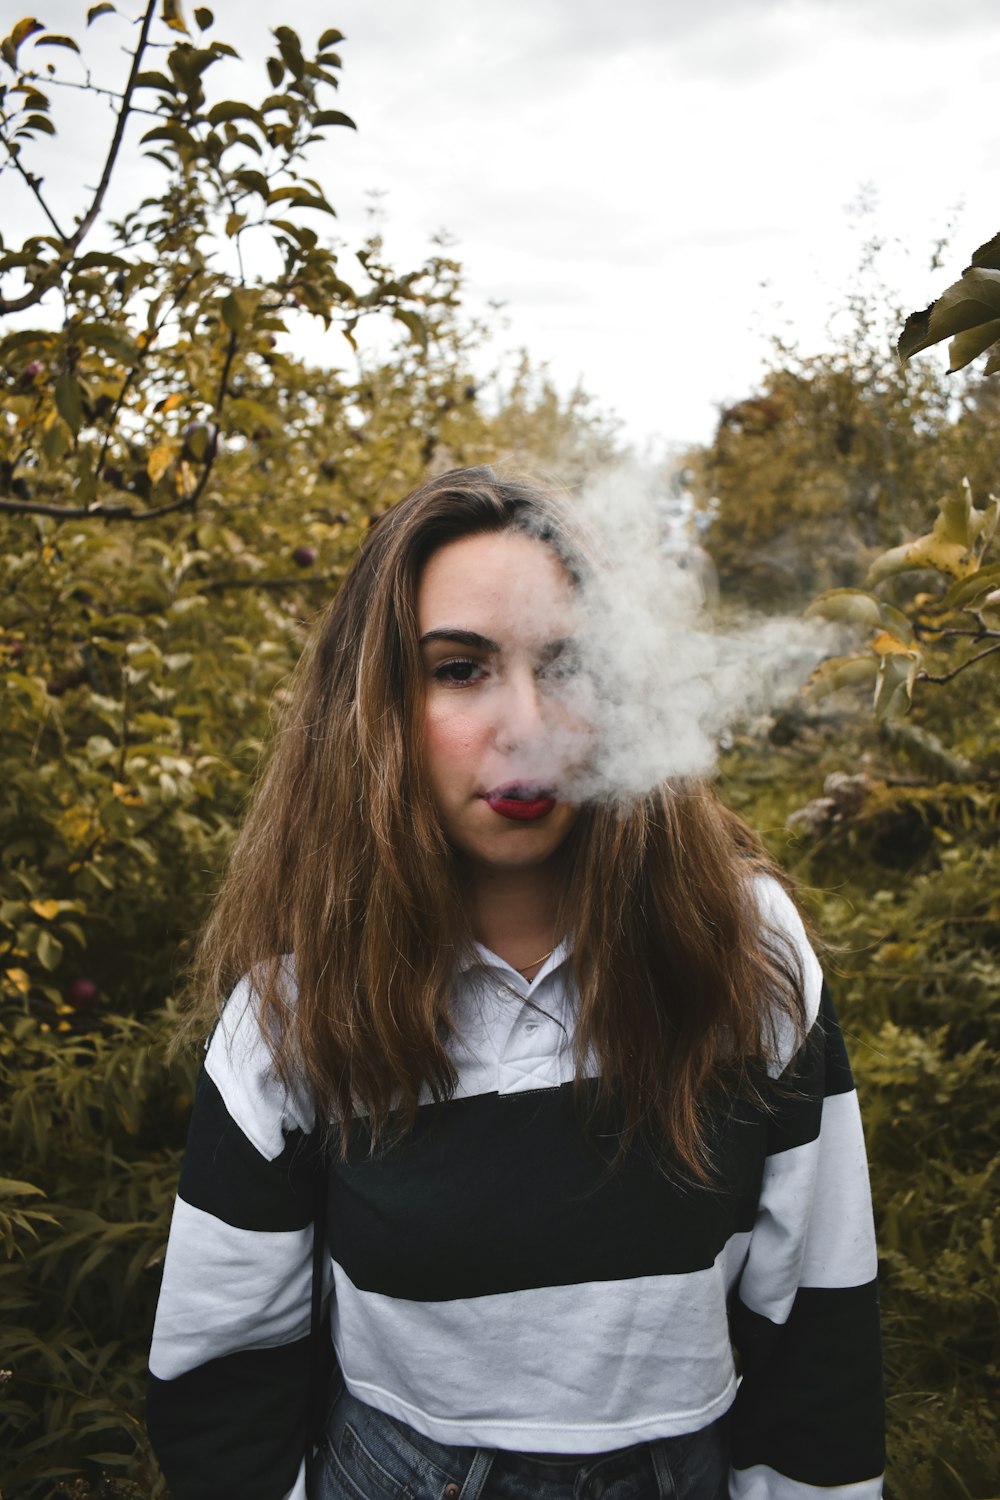 a woman with a cigarette in her mouth